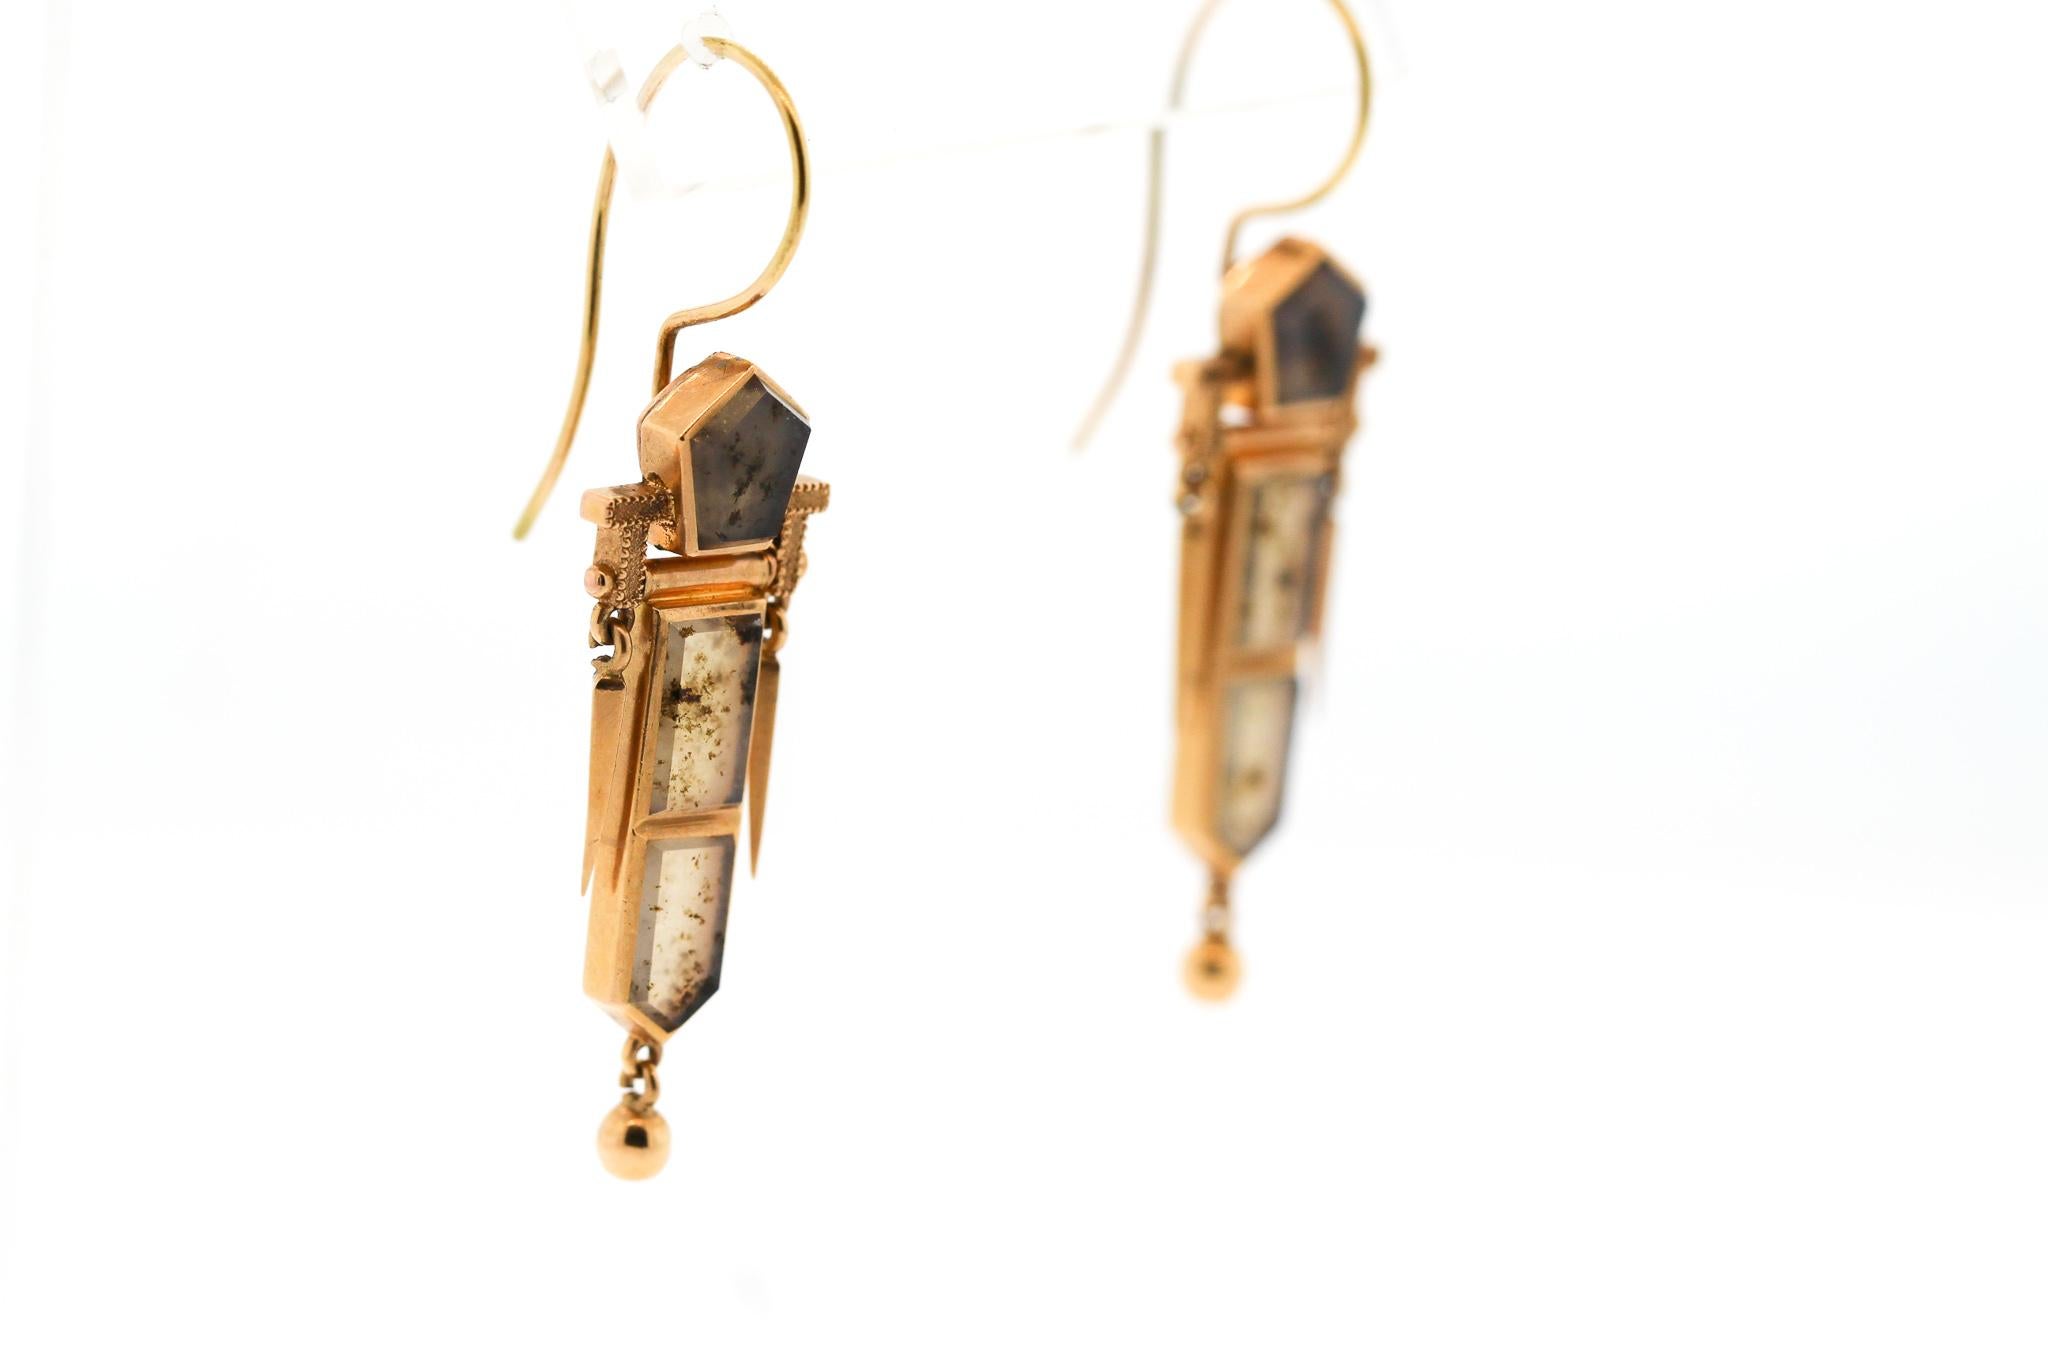 Sculptural and elegant antique Victorian moss agate pendant earrings made in 14k yellow gold. These earrings center on three pieces of moss agate, with gold darts hanging down on either side. A small round ball completes the bottom of the earring.